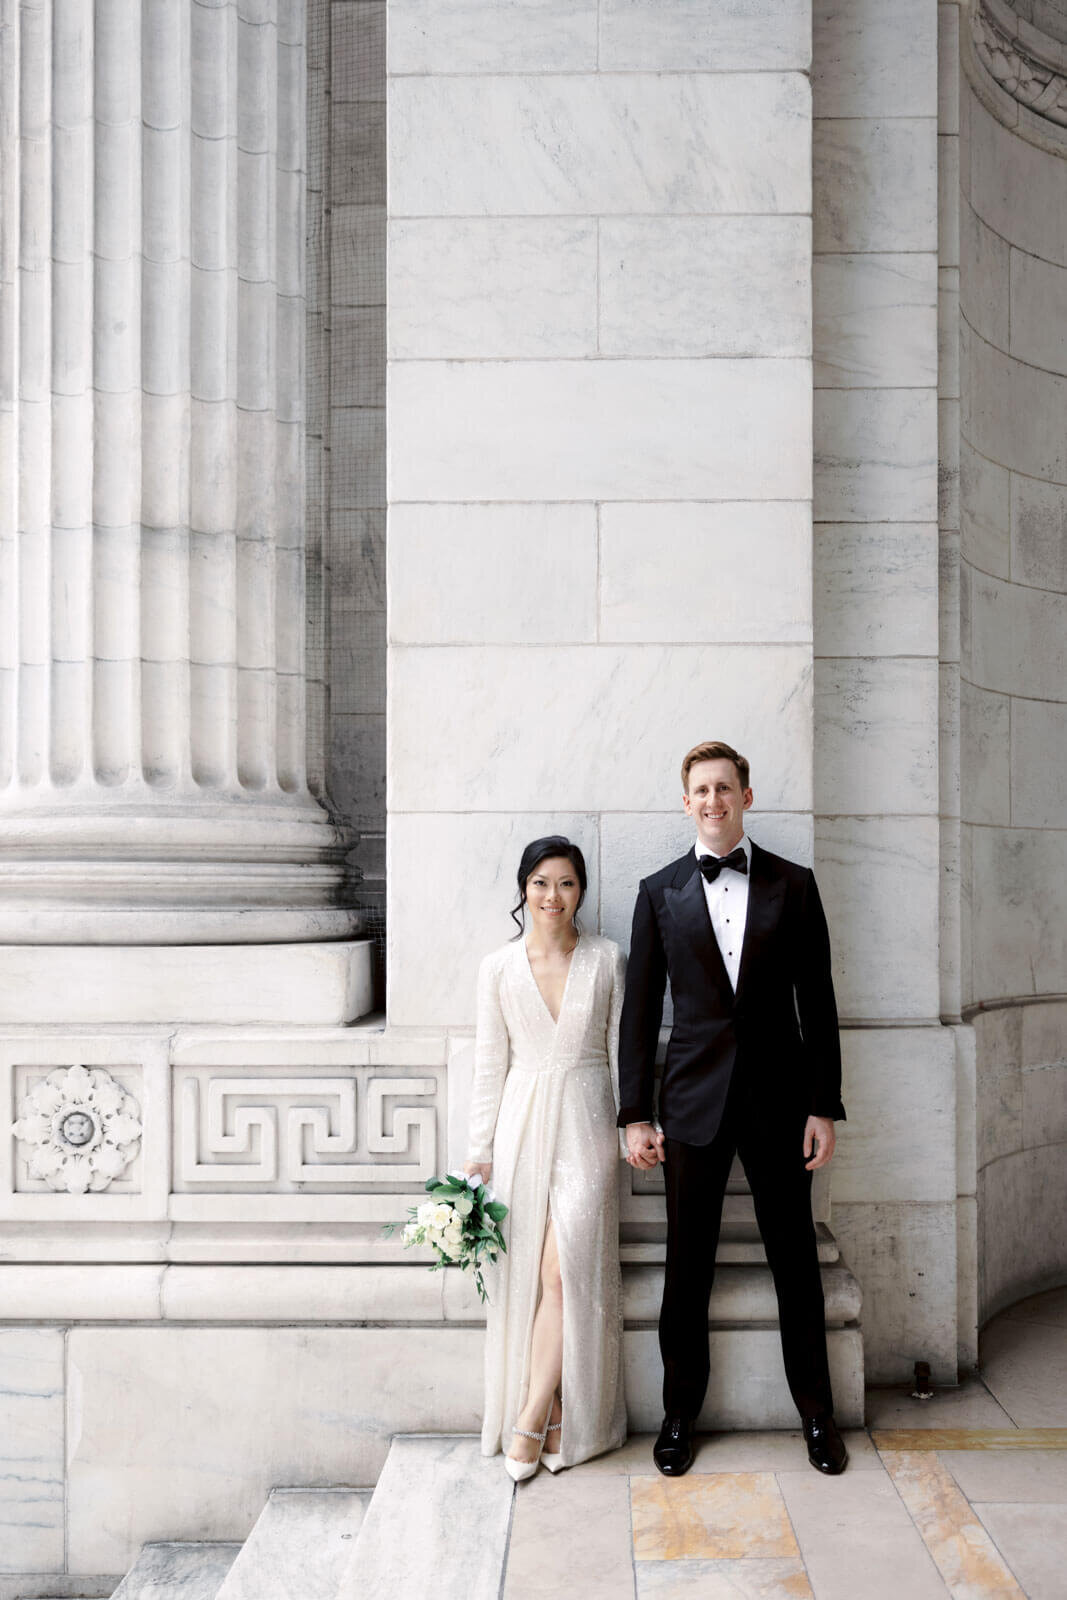 The bride and the groom are on top of the New York Public Library's grand staircase with large marble columns and walls.